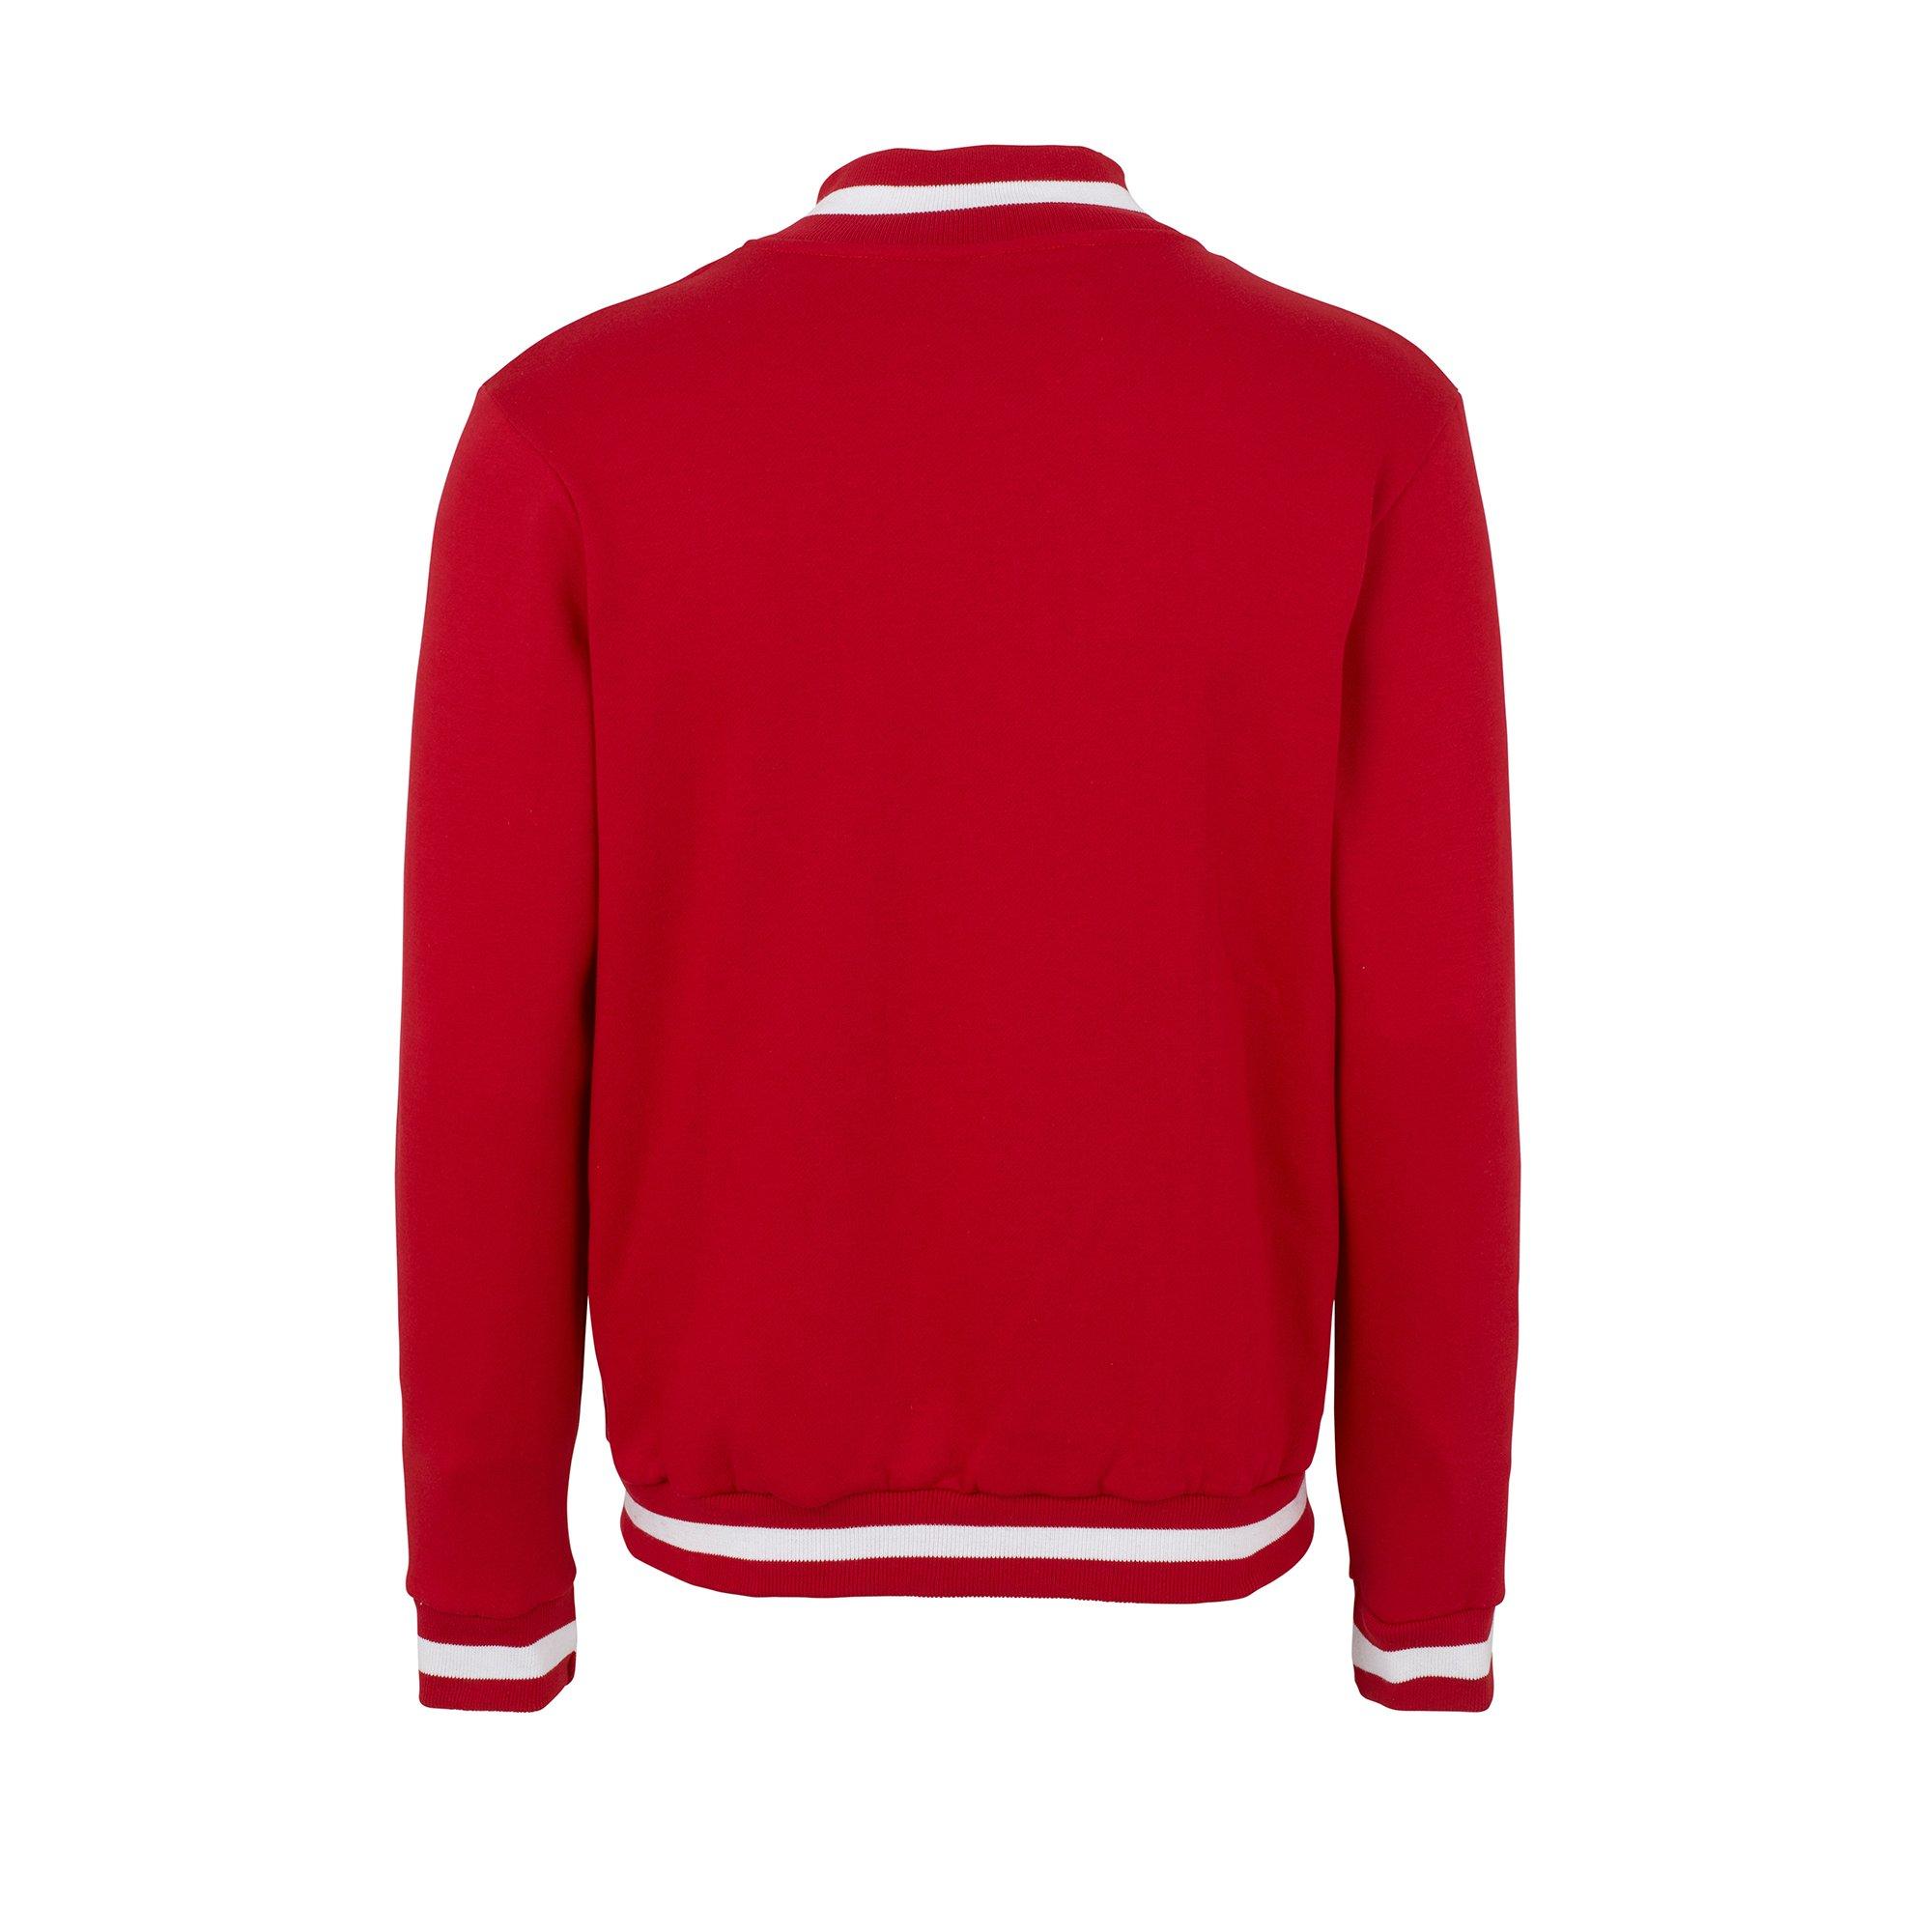 Arsenal Retro 1970s Cotton Jacket | Official Online Store